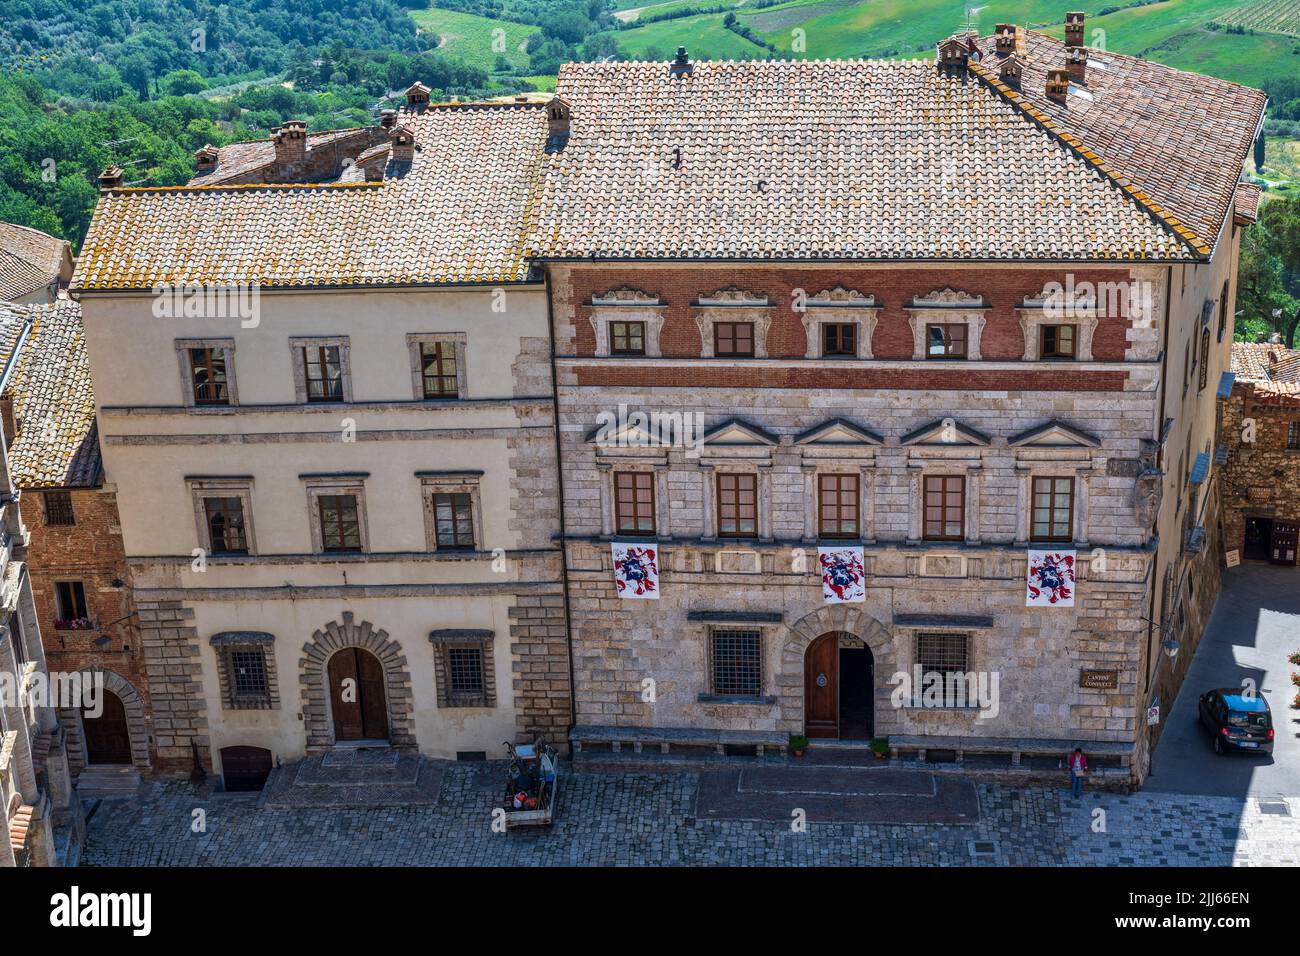 Elevated view of Palazzo Contucci on Piazza Grande from the tower of Palazzo Comunale in the hilltop town of Montepulciano in Tuscany, Italy Stock Photo